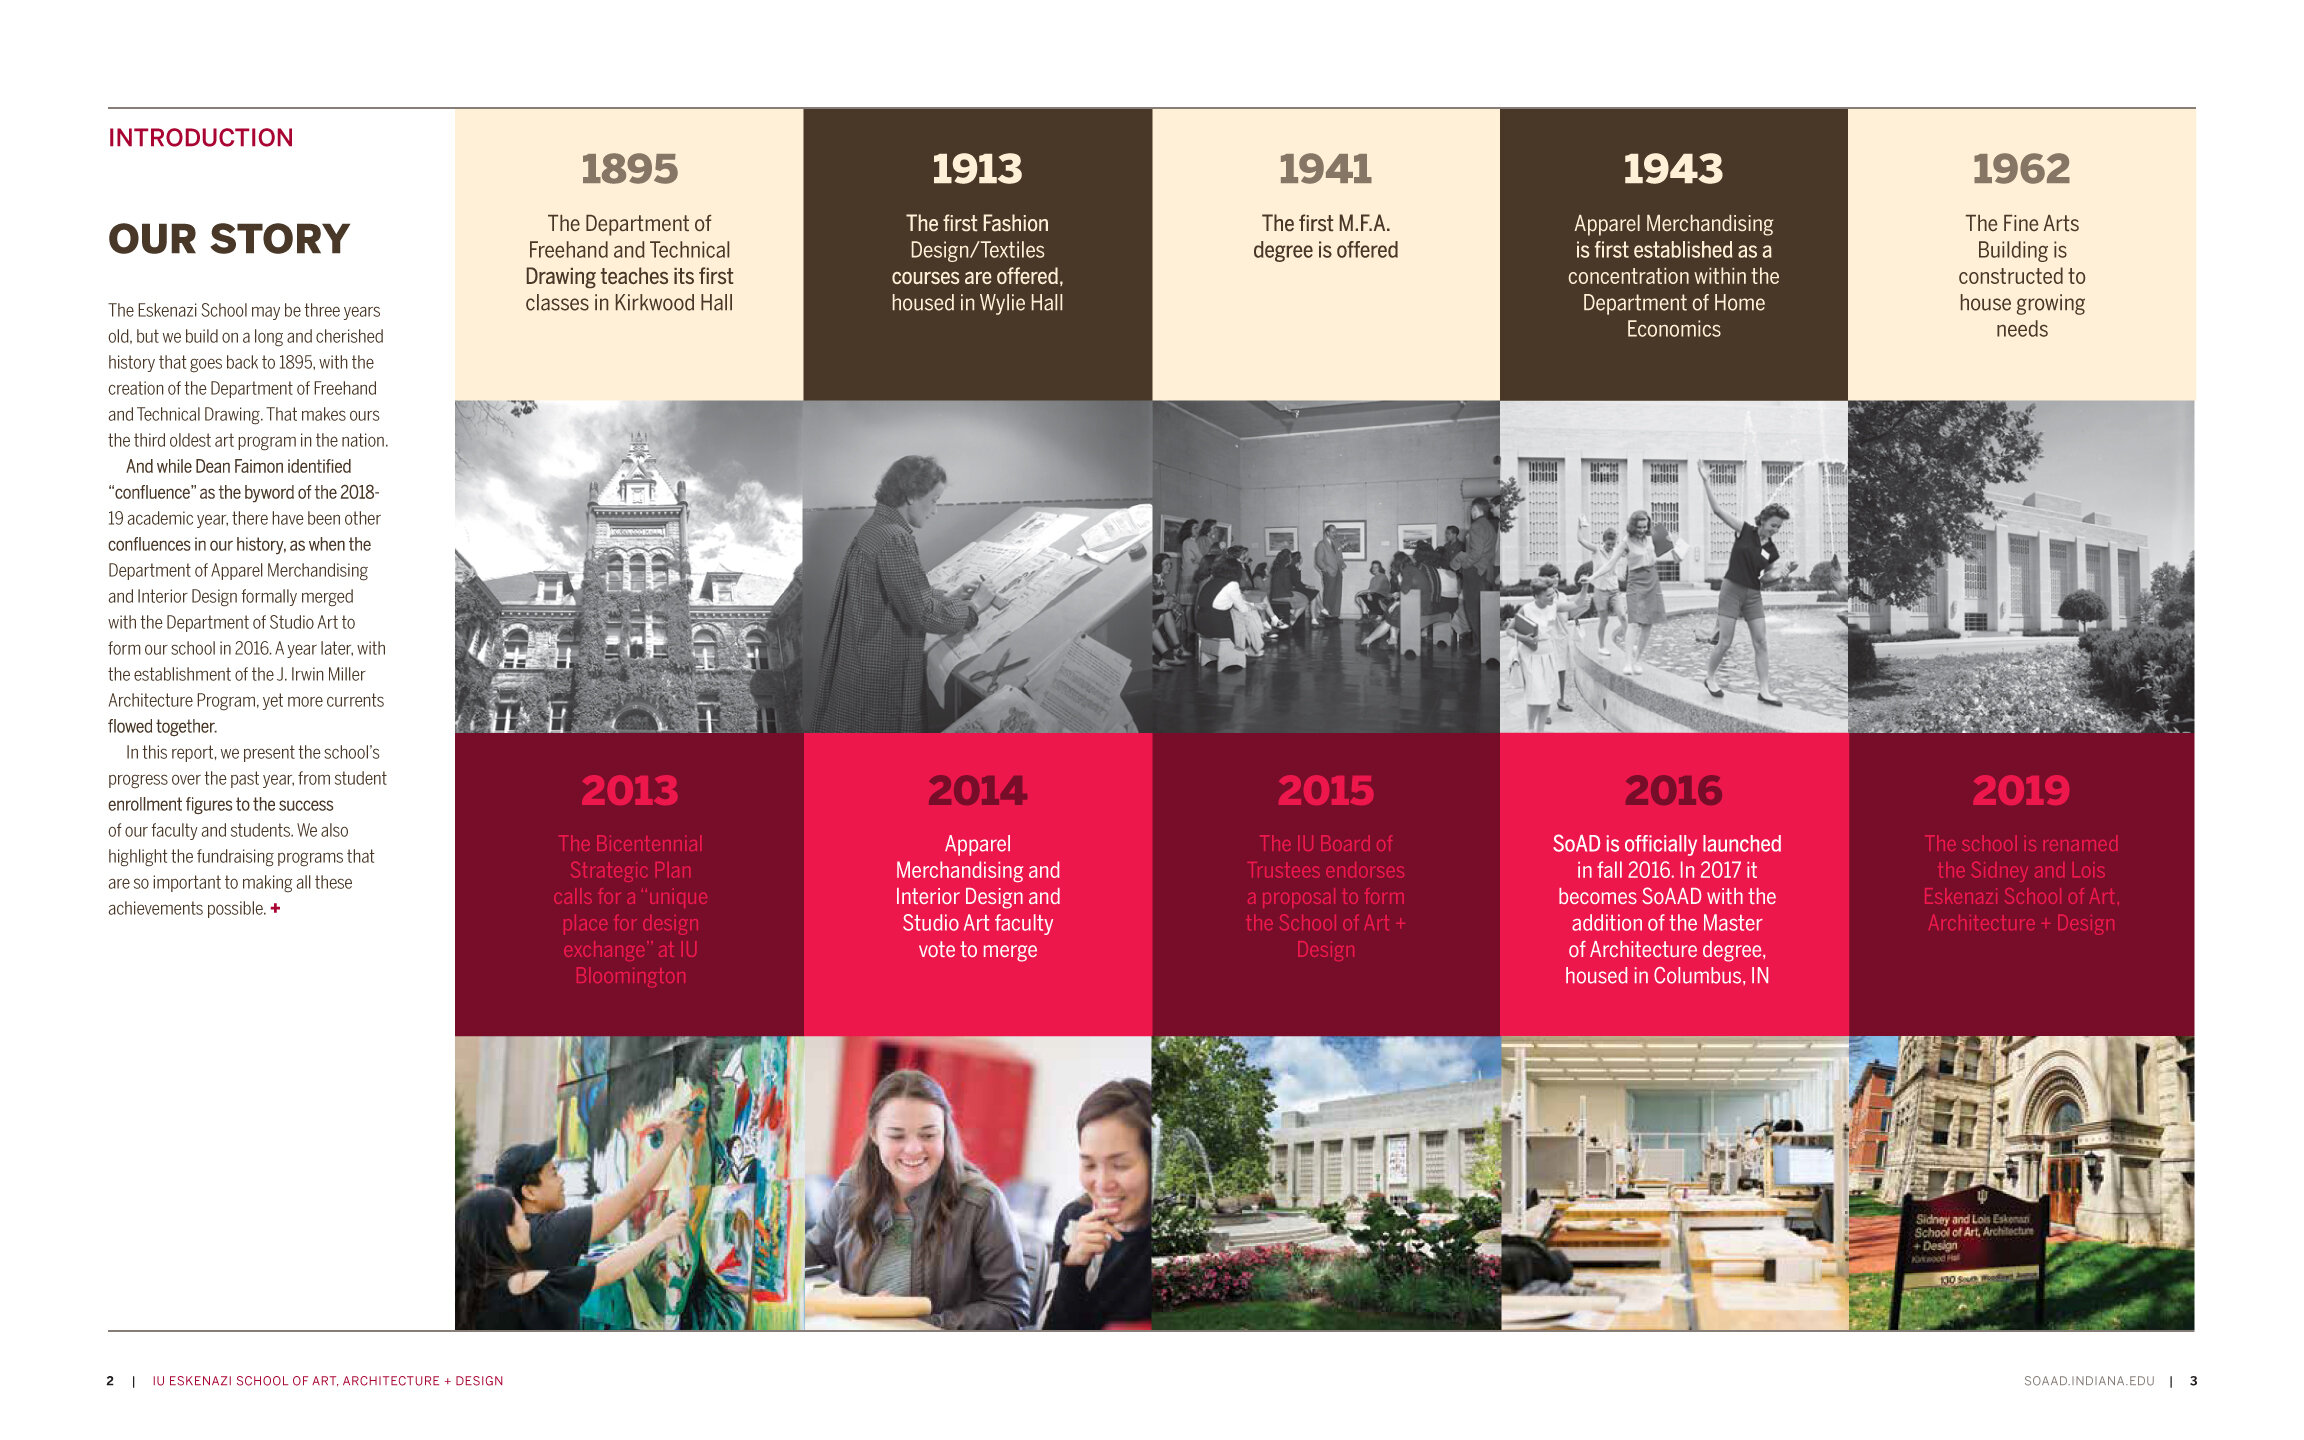  Image of interior spread of 2018-19 Eskenazi School annual report featuring information and images of portraying the history of the school 